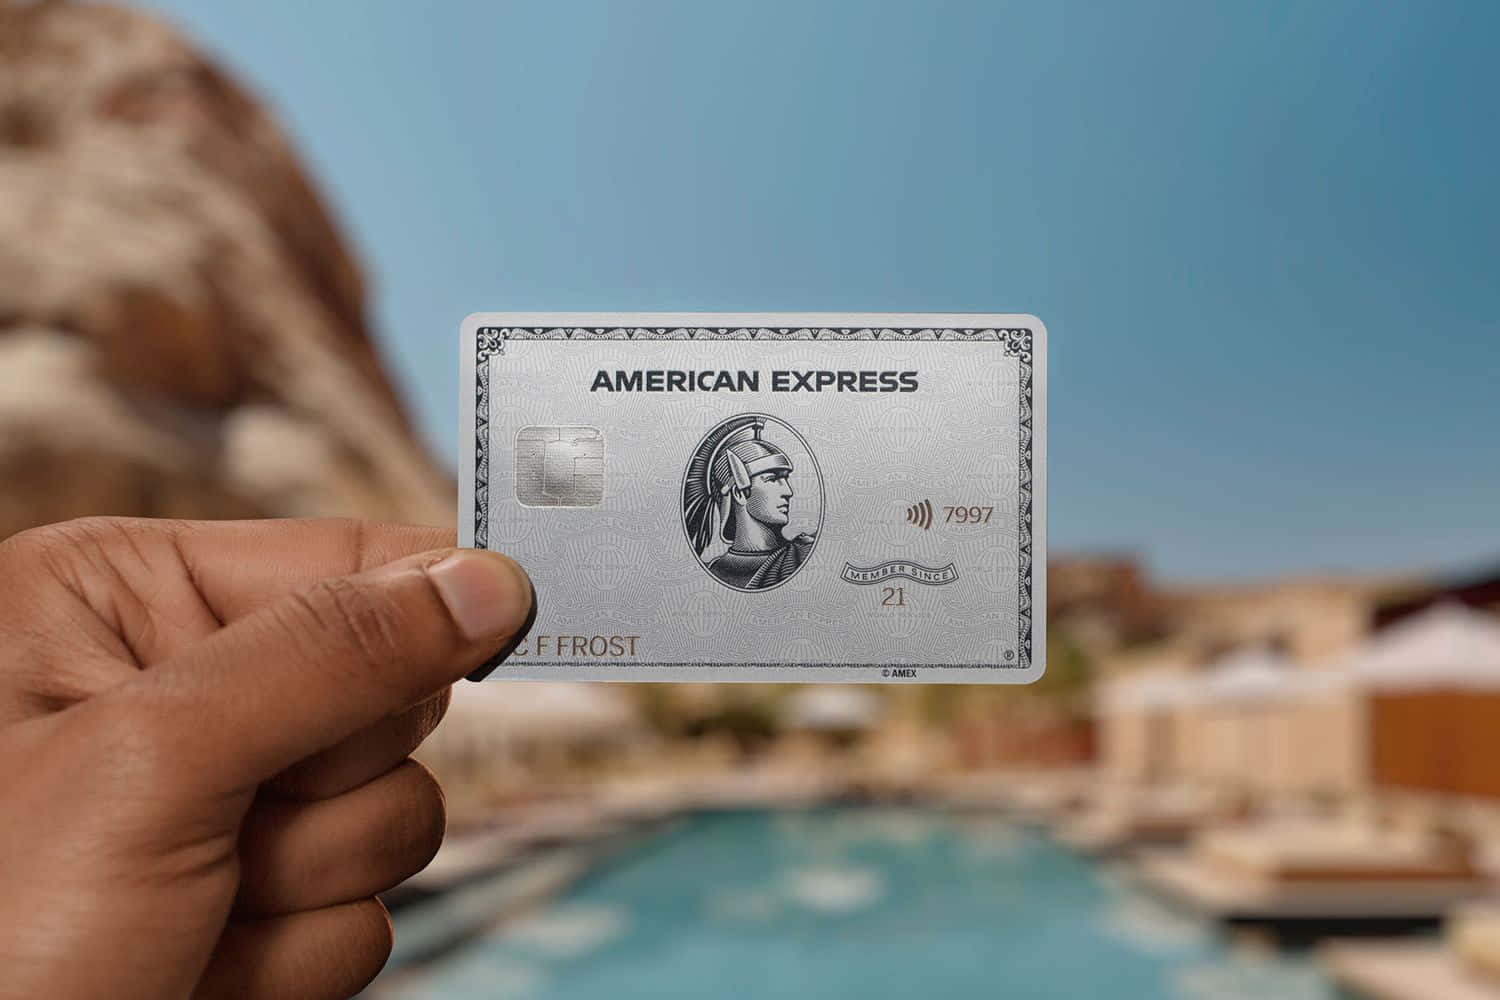 Get Amazing Rewards with American Express